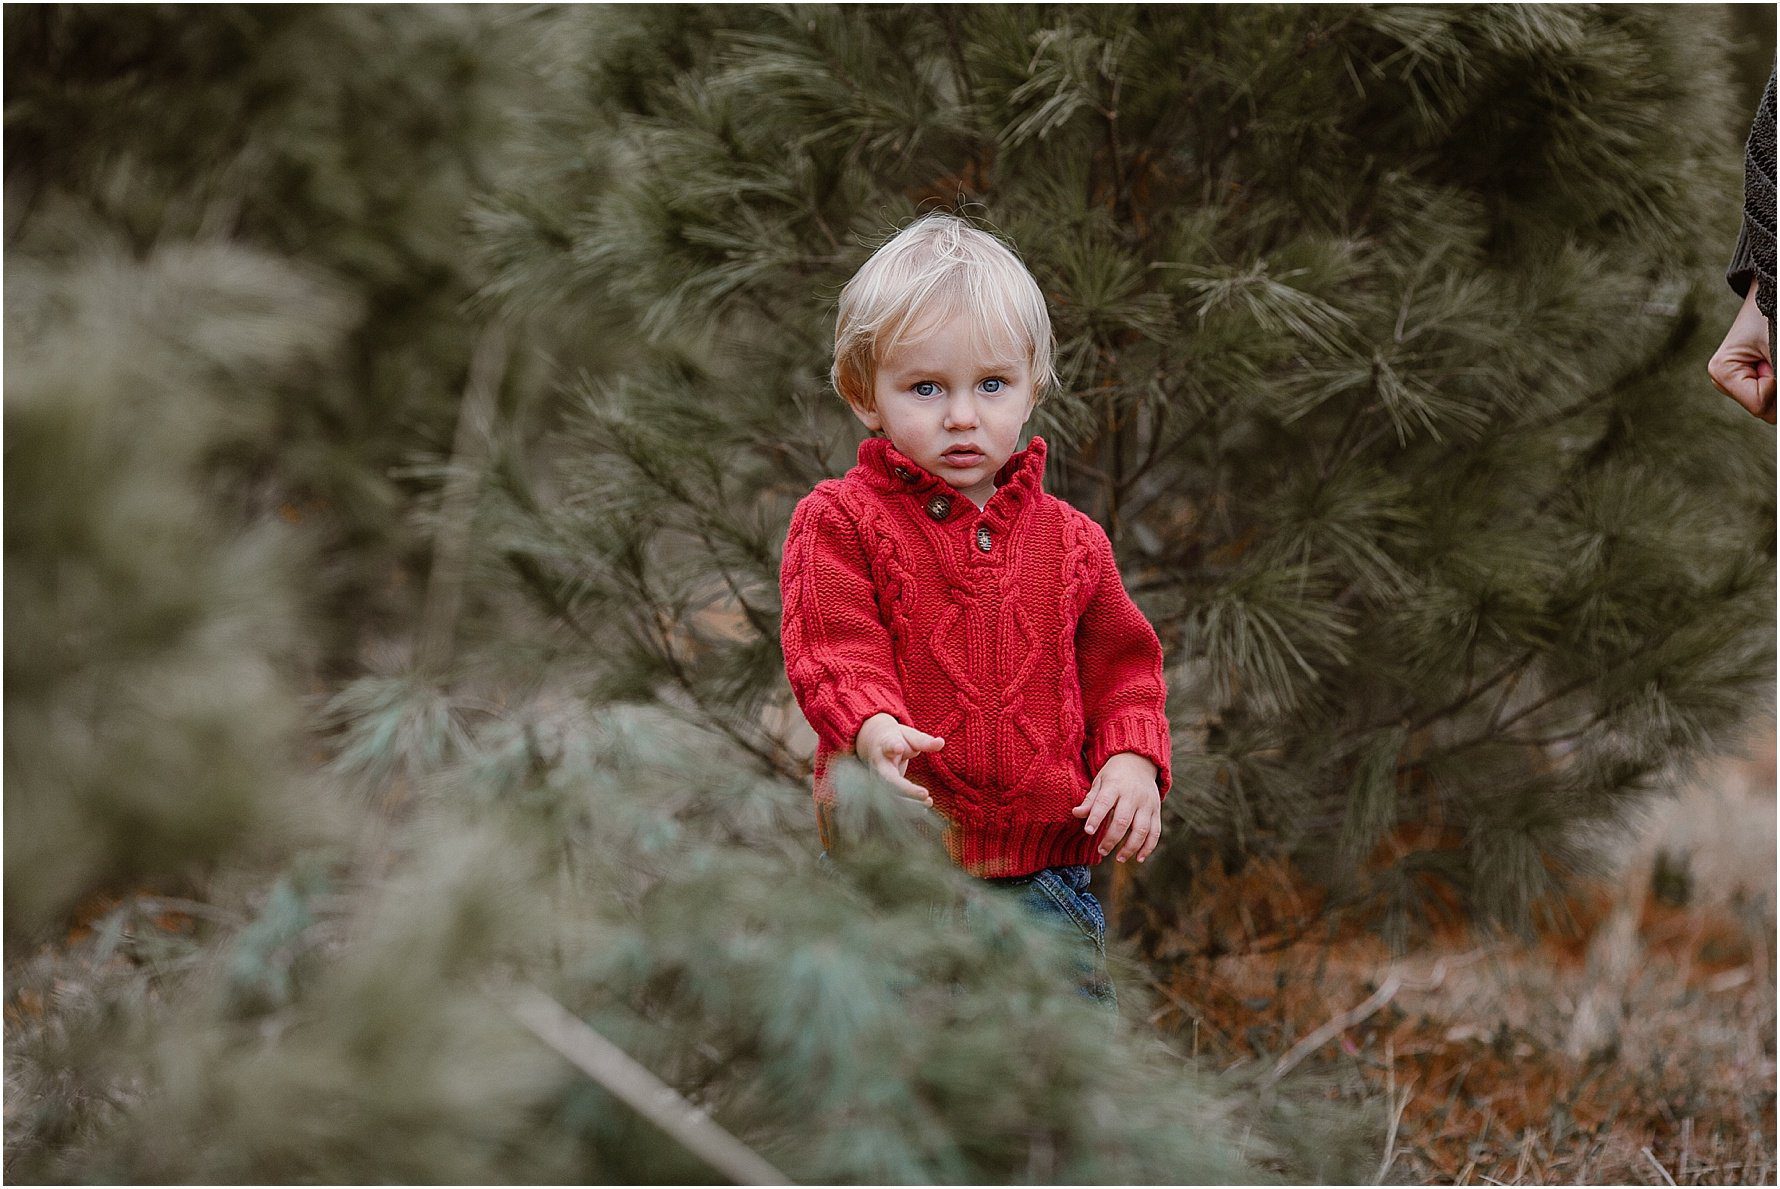 Christmas Tree Farm Family Photos in Knoxville | Erin Morrison Photography www.erinmorrisonphotography.com